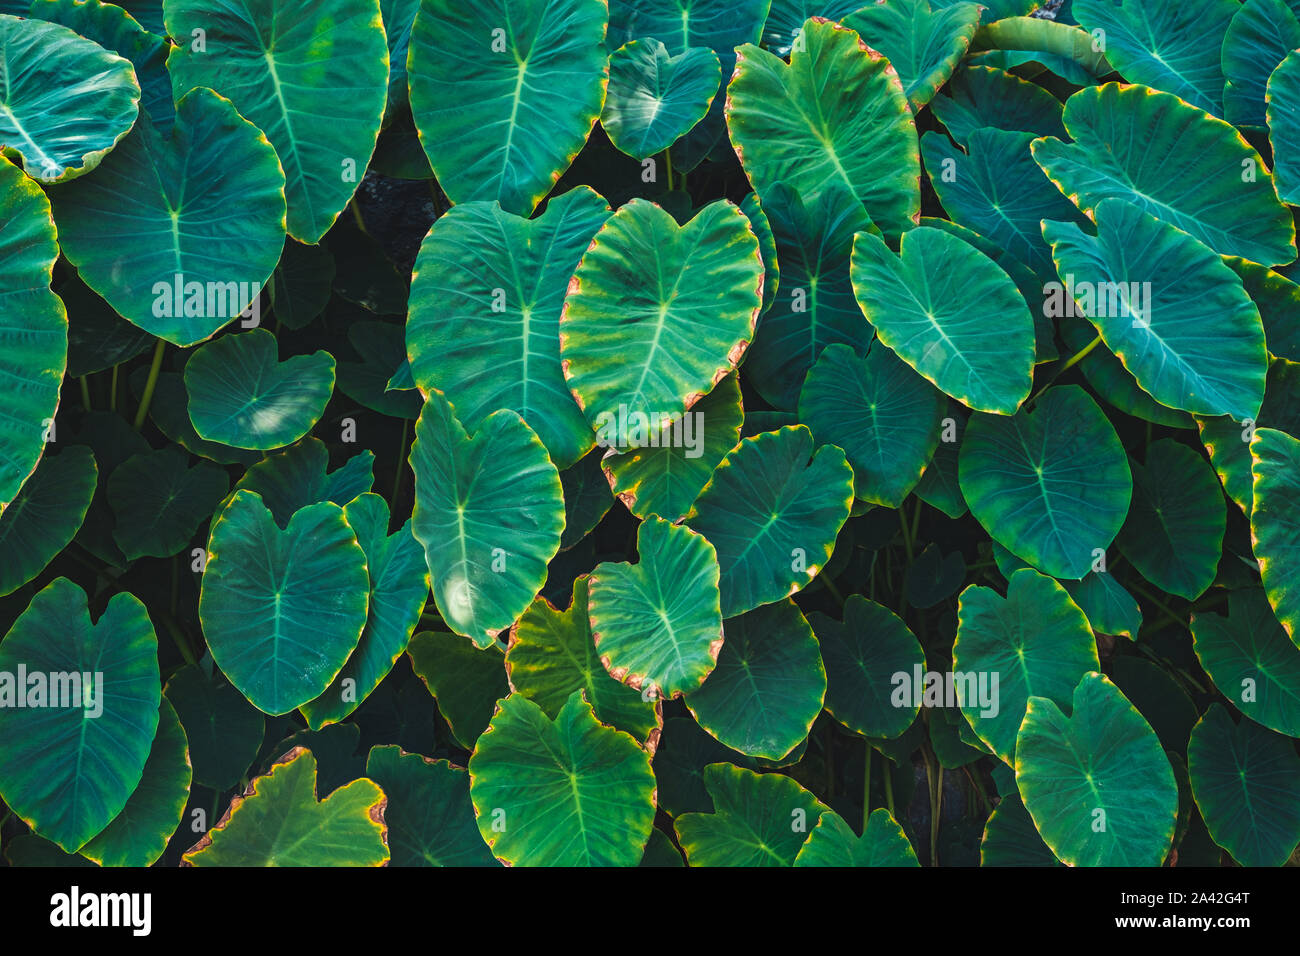 Big taro plant leaves a.k.a. elephant ears leaf  in tropical forest - Stock Photo